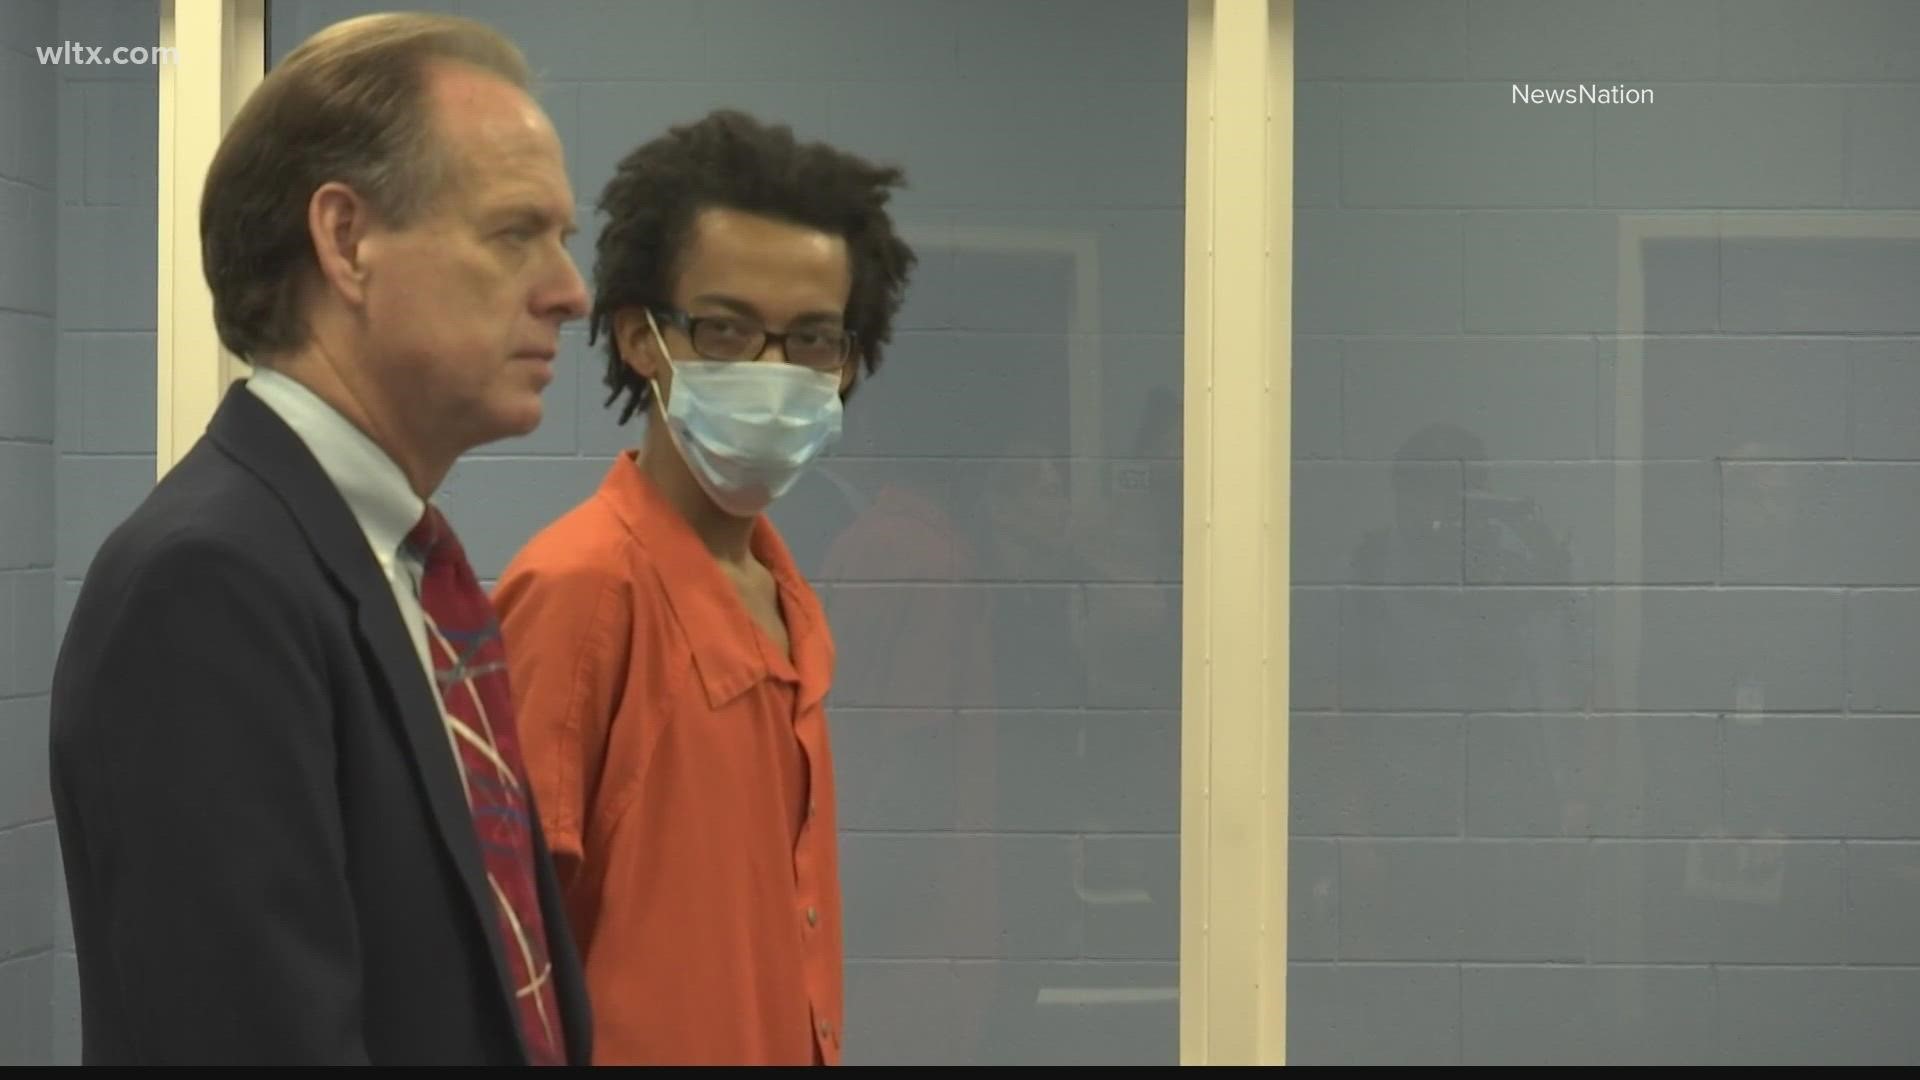 Matthew Allen Dewitt, who is accused of shooting and killing three family members, including two in Columbia, made his first court appearance Wednesday.